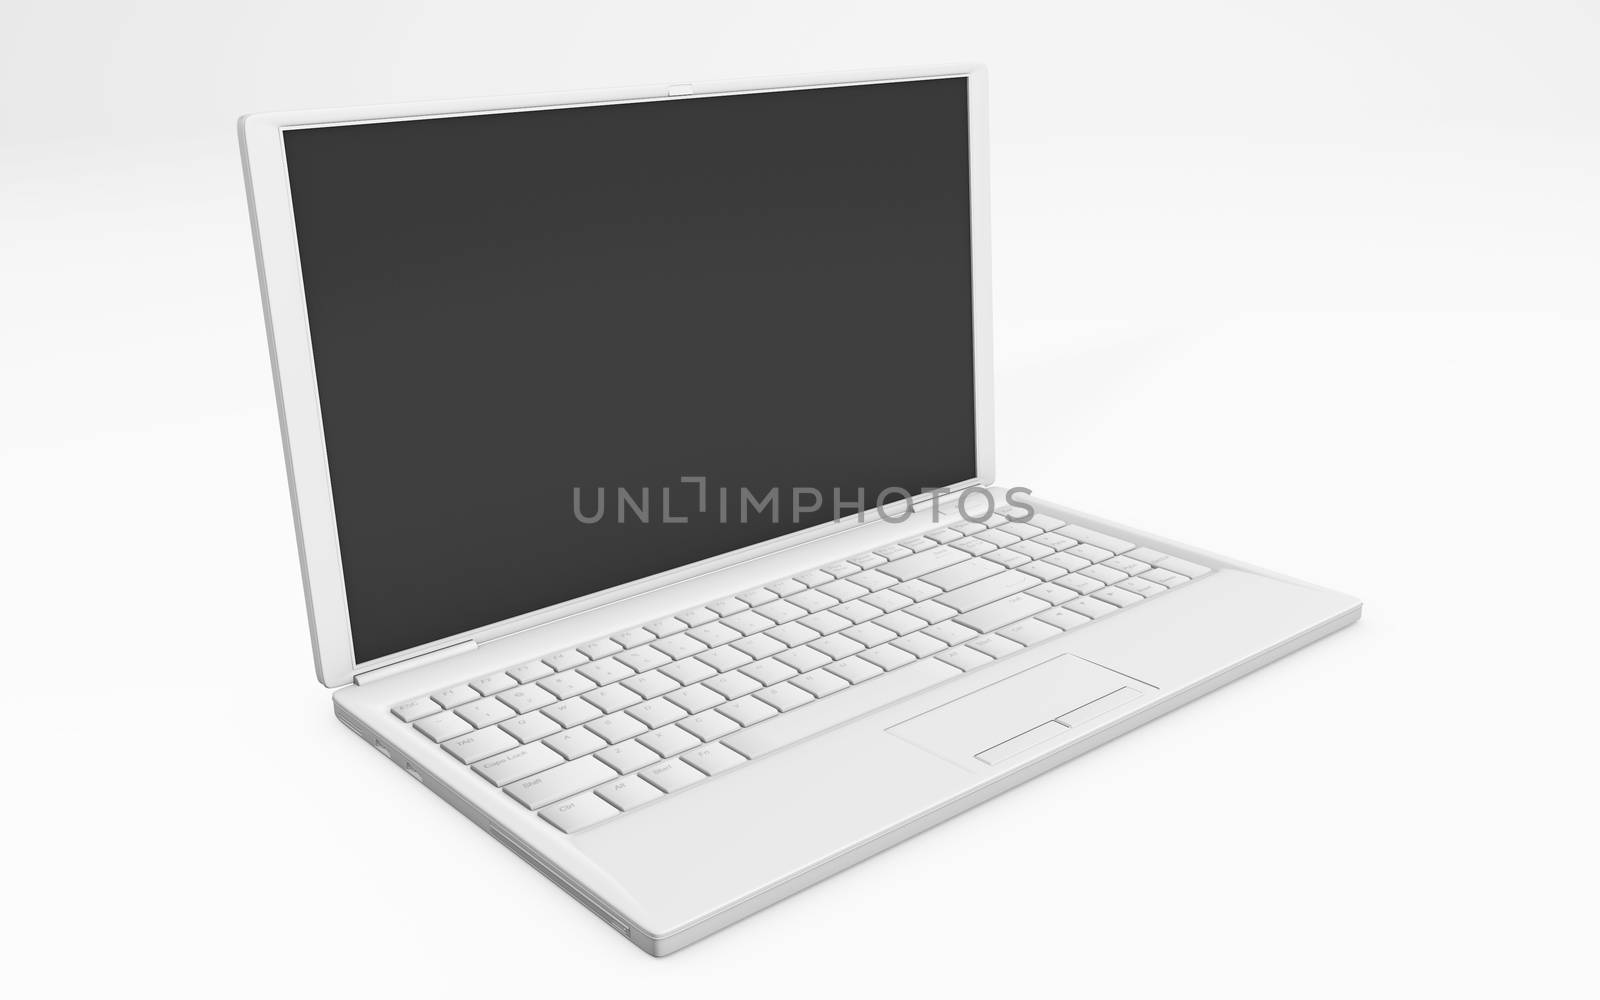 3d rendering of a laptop white colored isolated on white by F1b0nacci